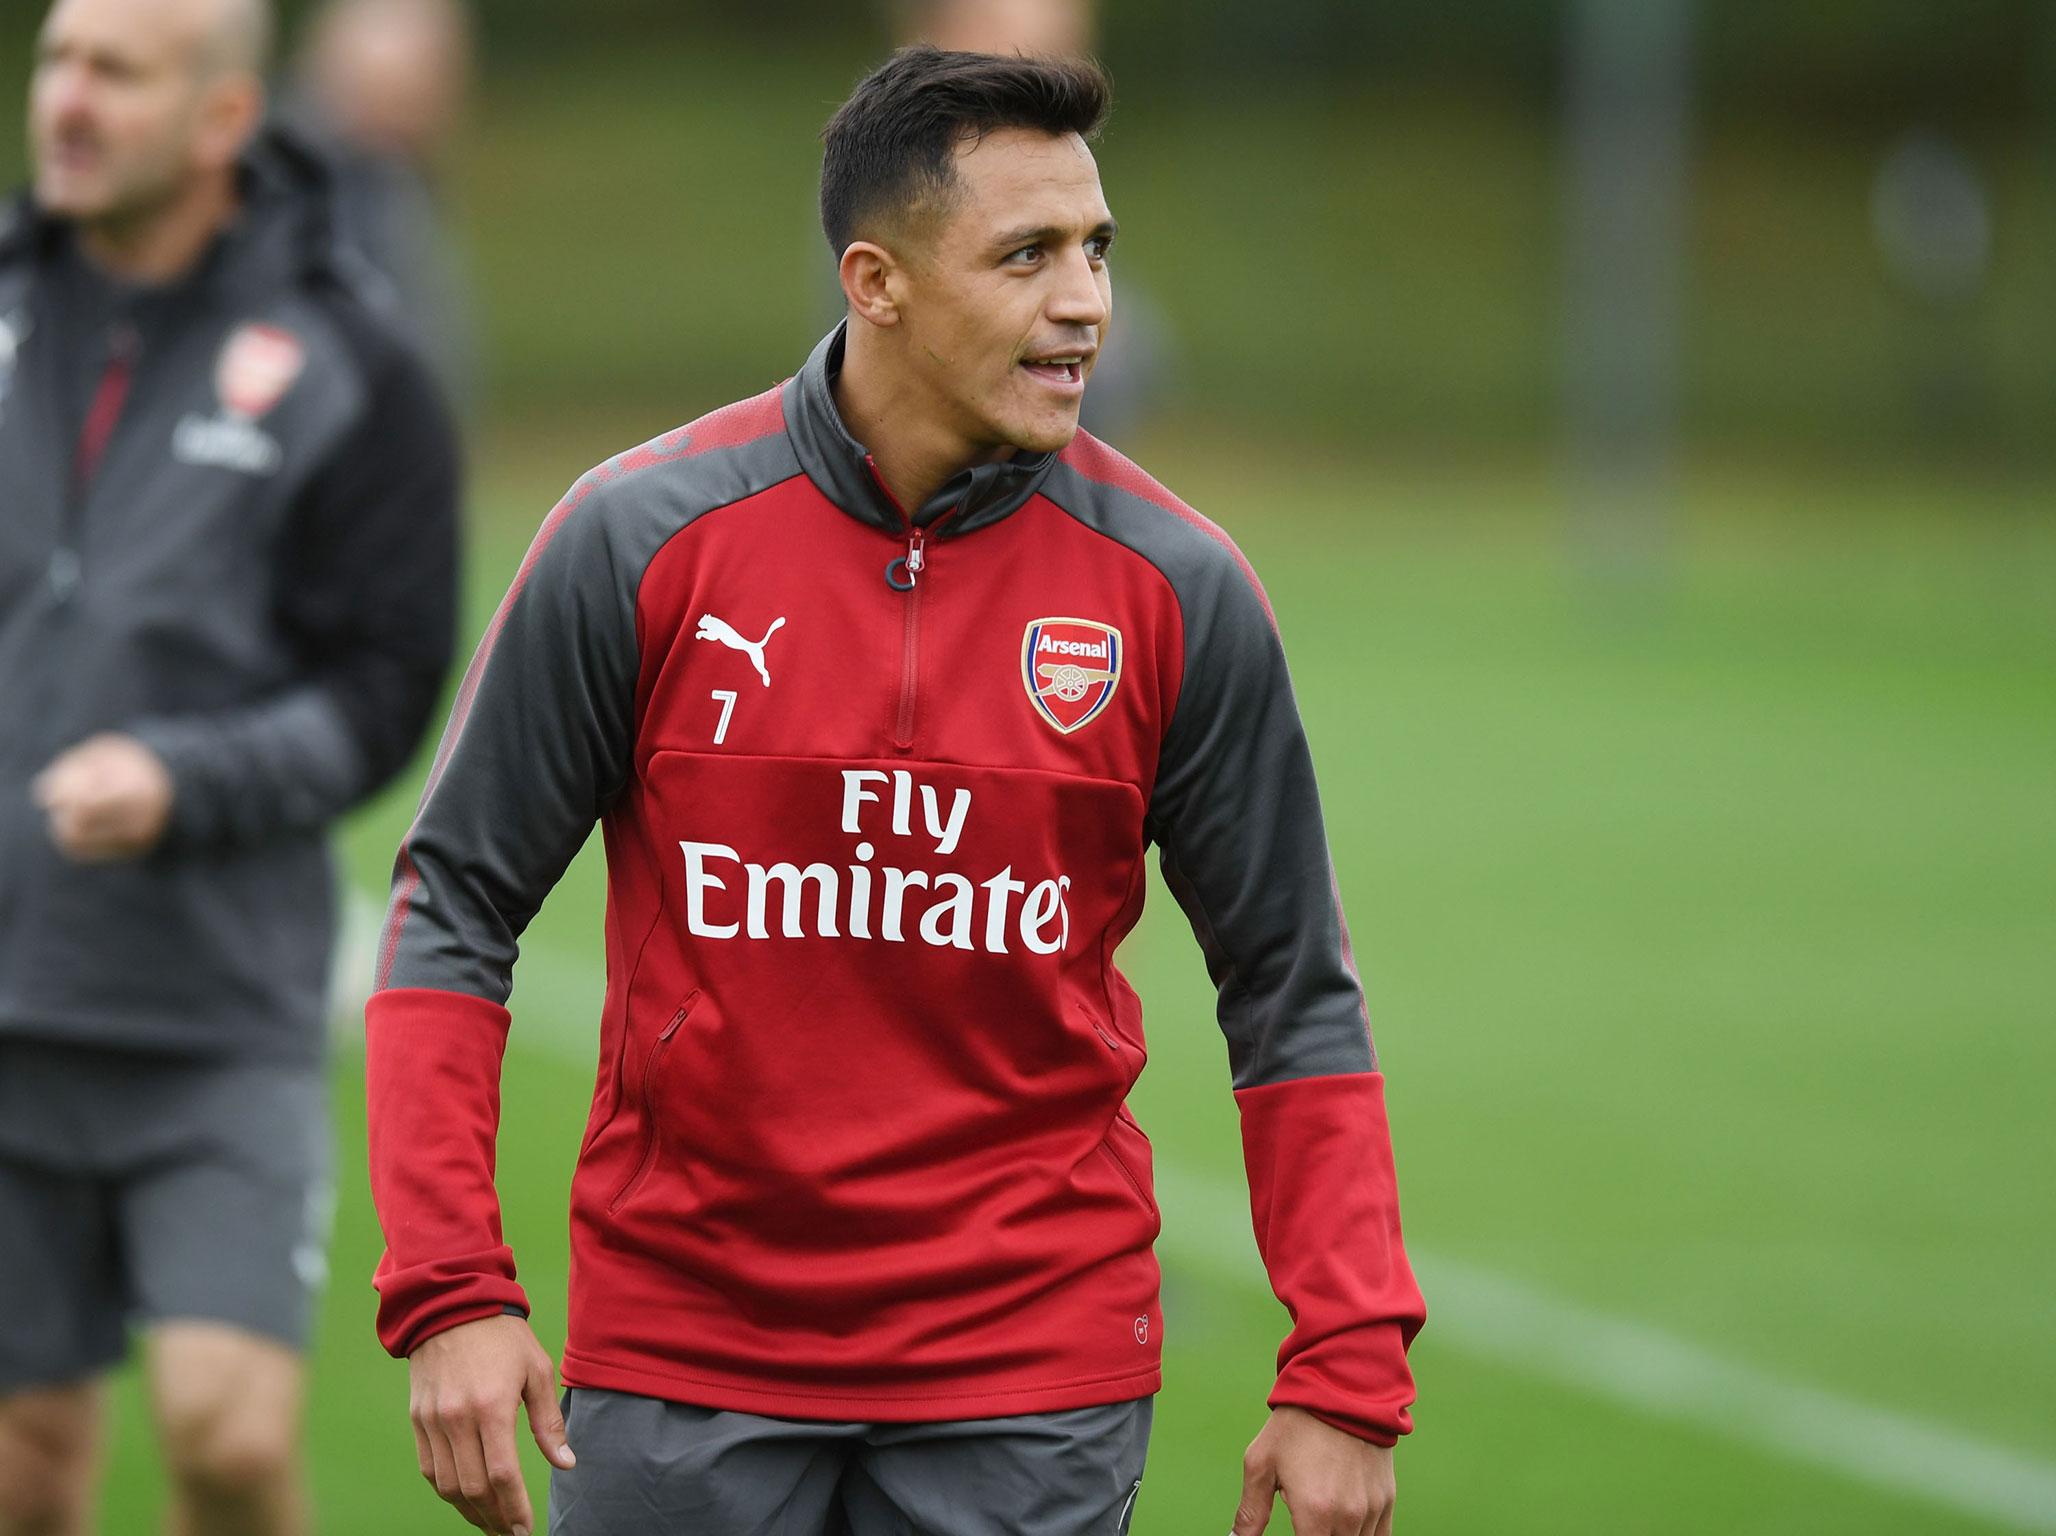 Sanchez desperately wants a move away from Arsenal